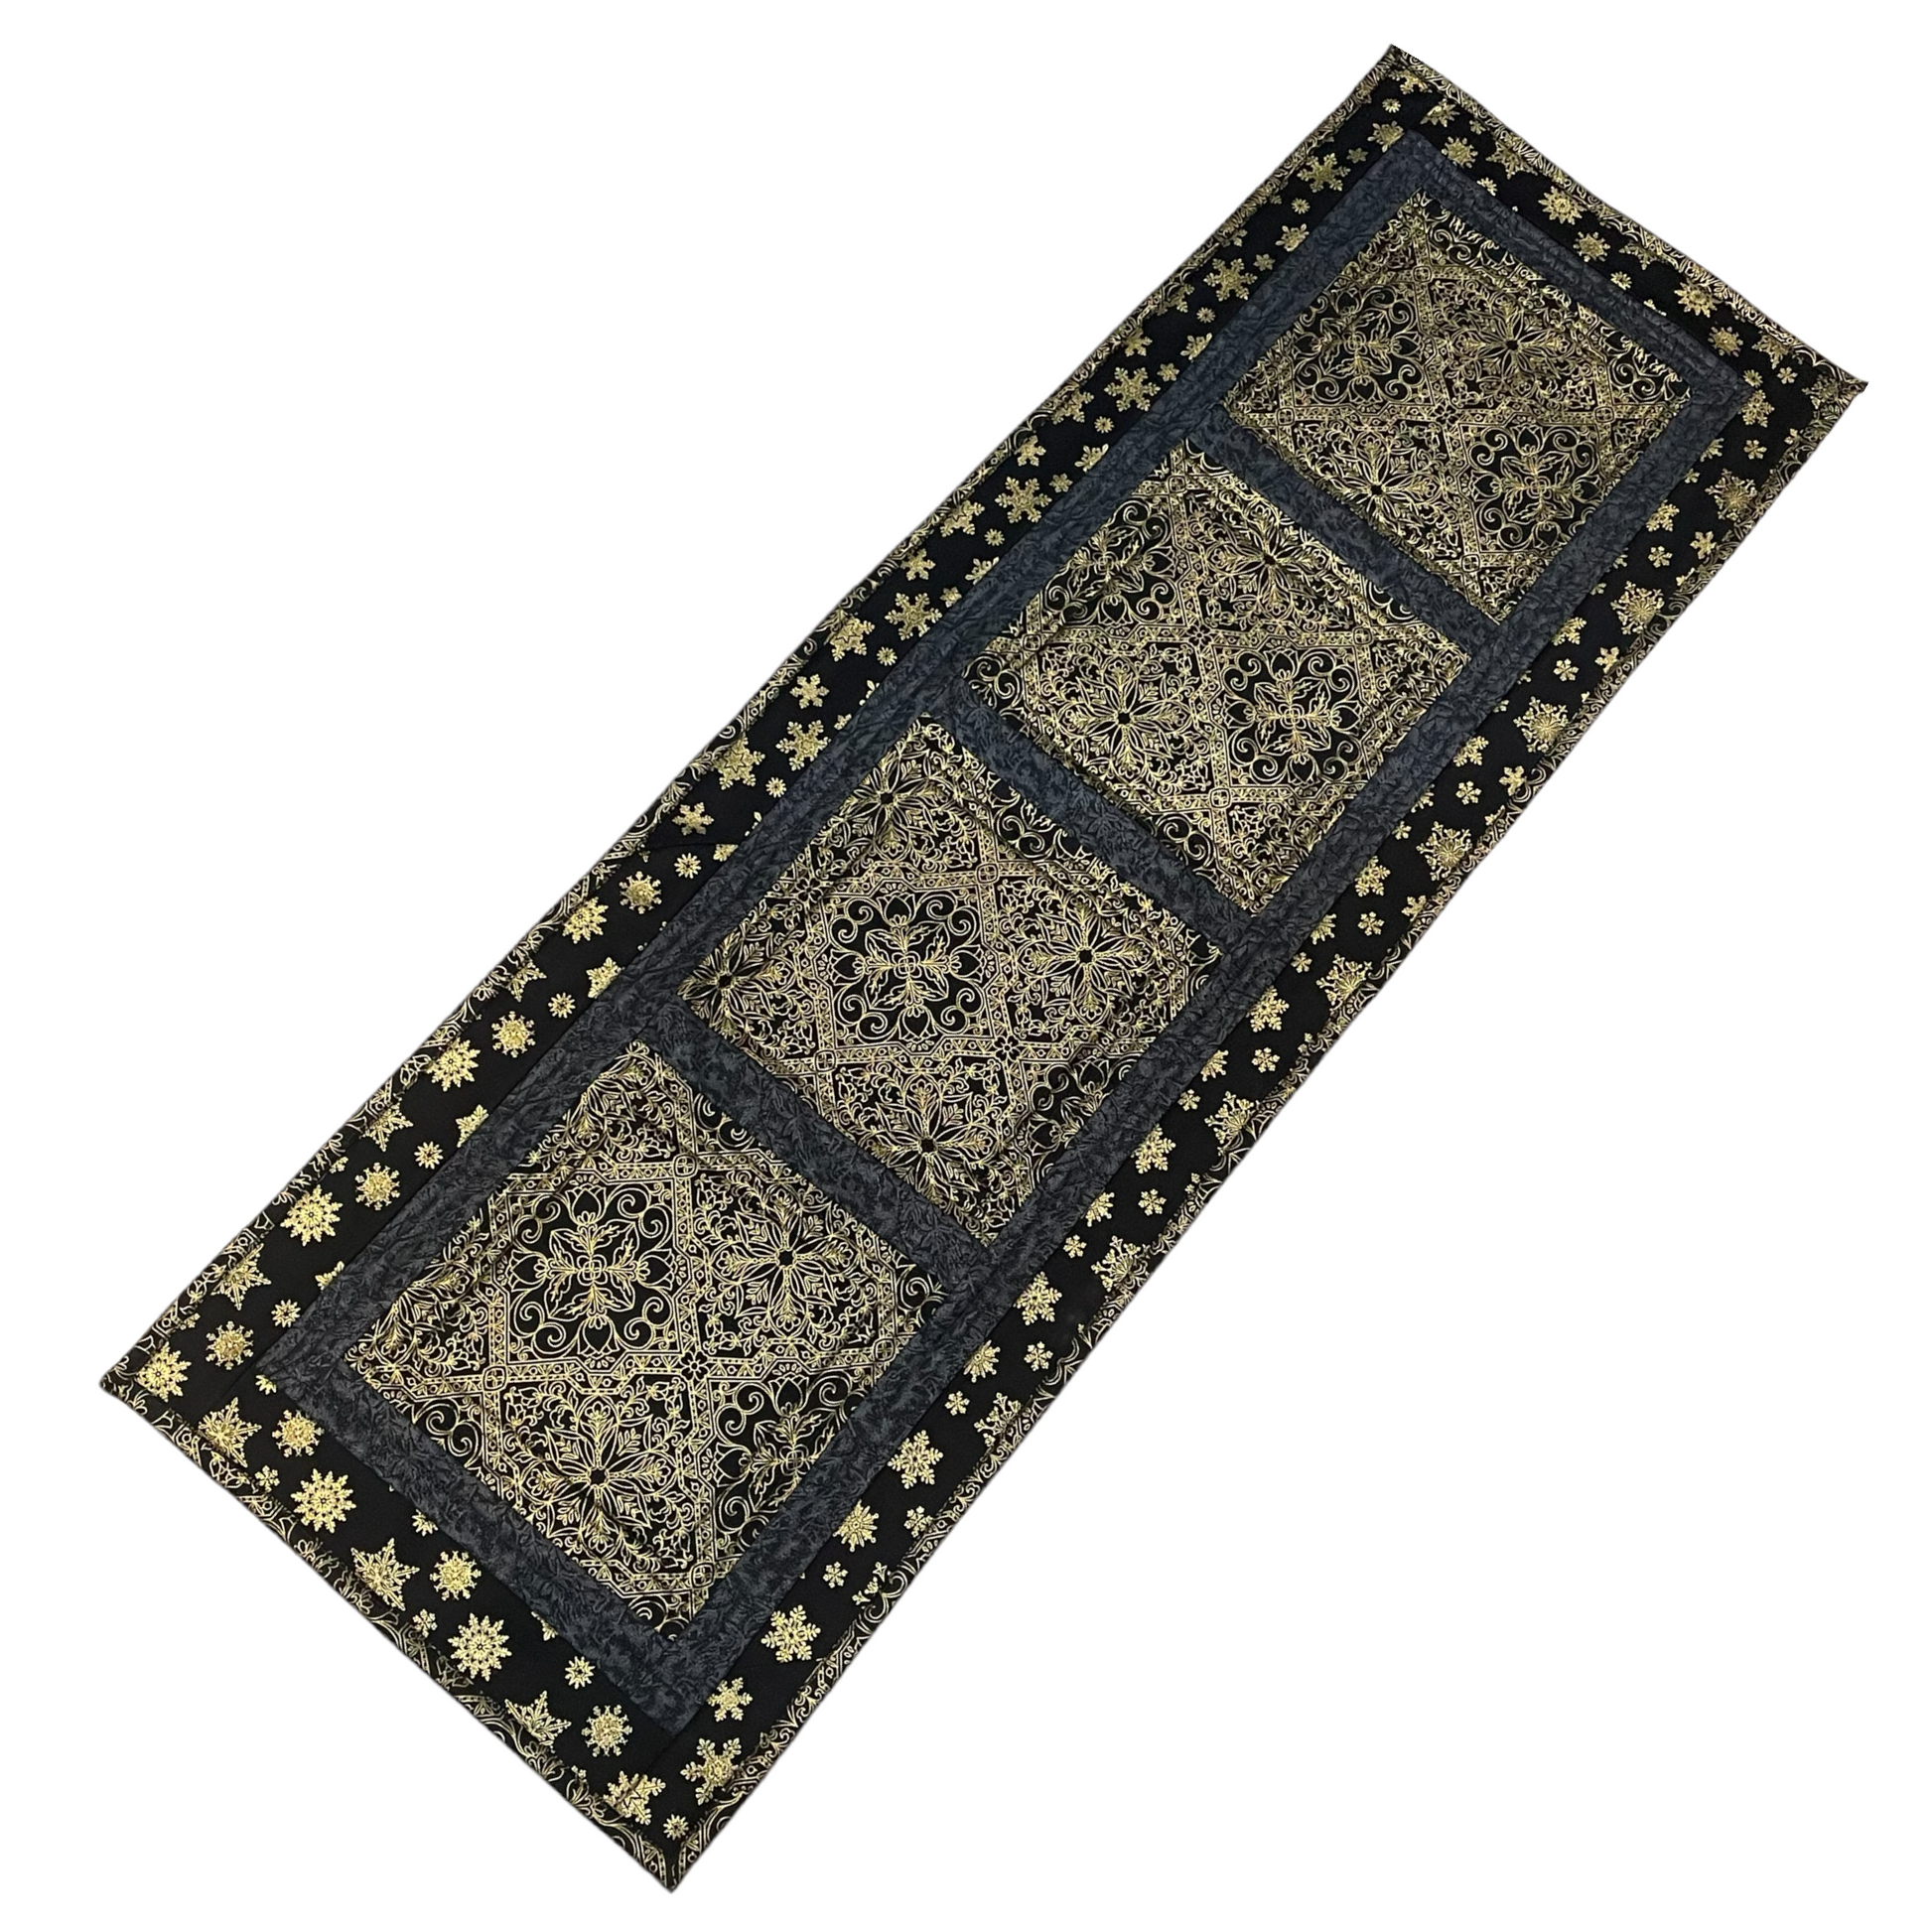 Black and Gold Christmas Table Runner, Quilted Christmas Table Runner - Home Stitchery Decor